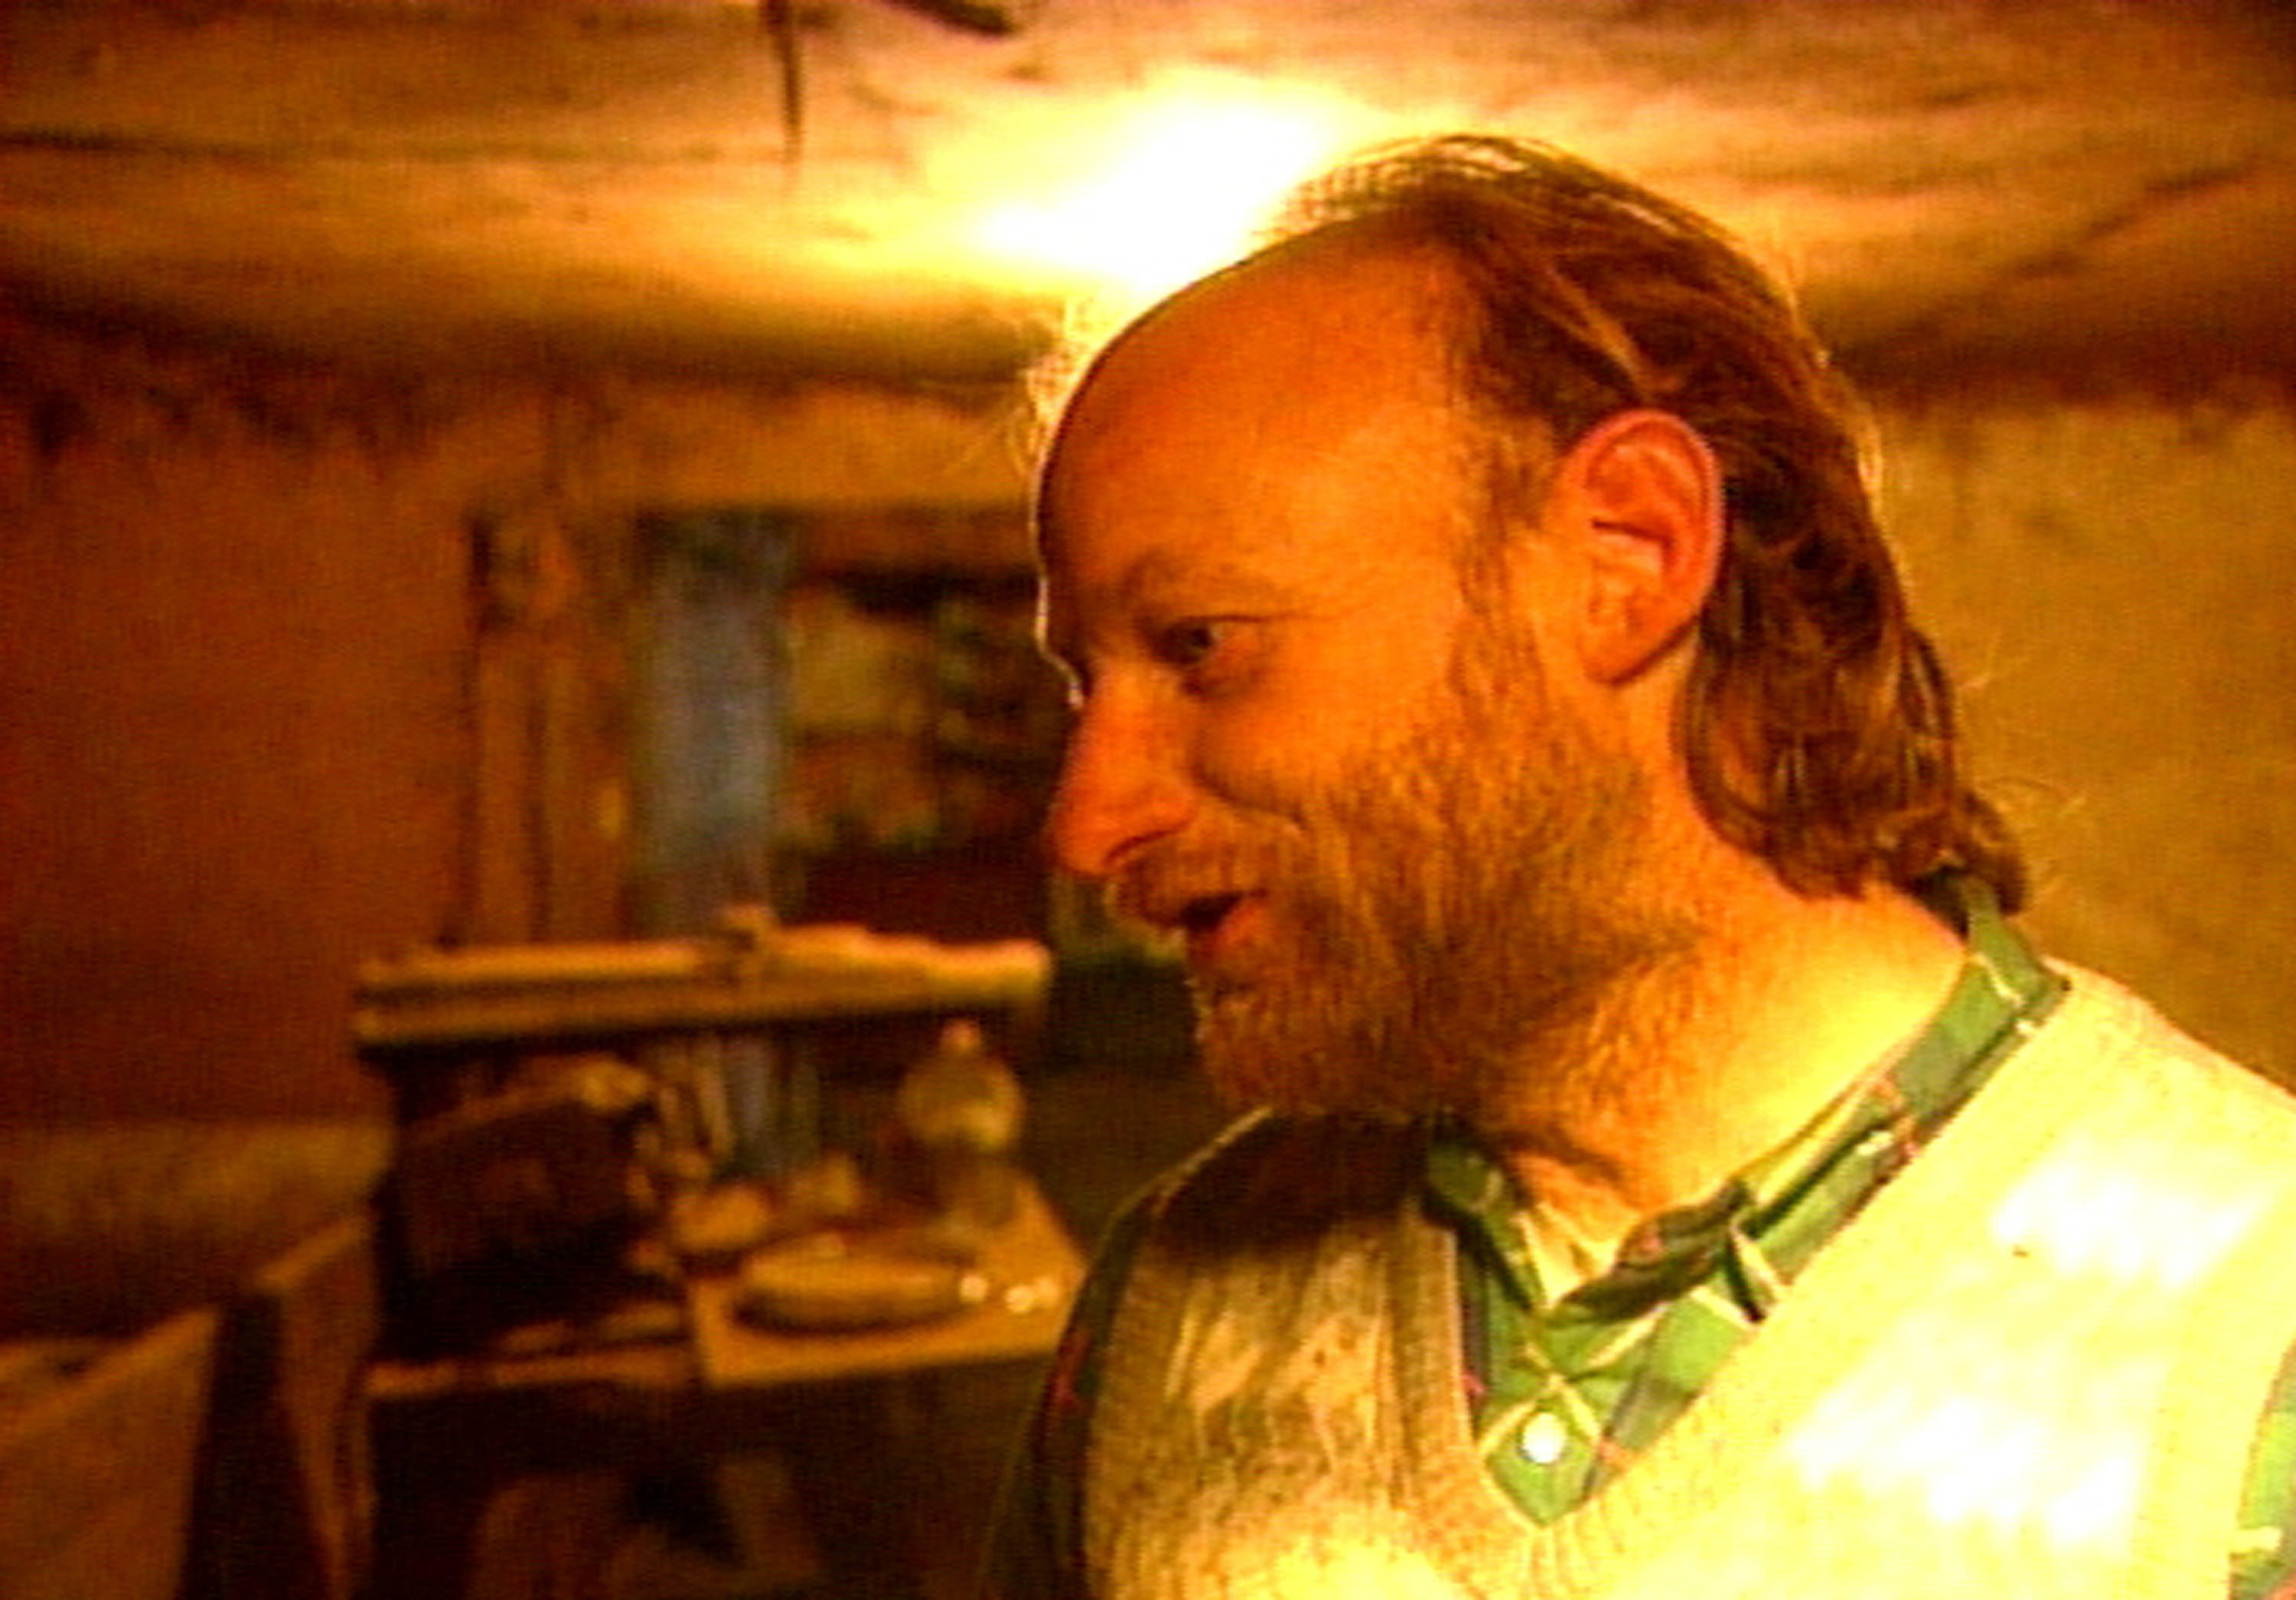 Robert Pickton is shown in an undated image from a television footage. Photo: TNS